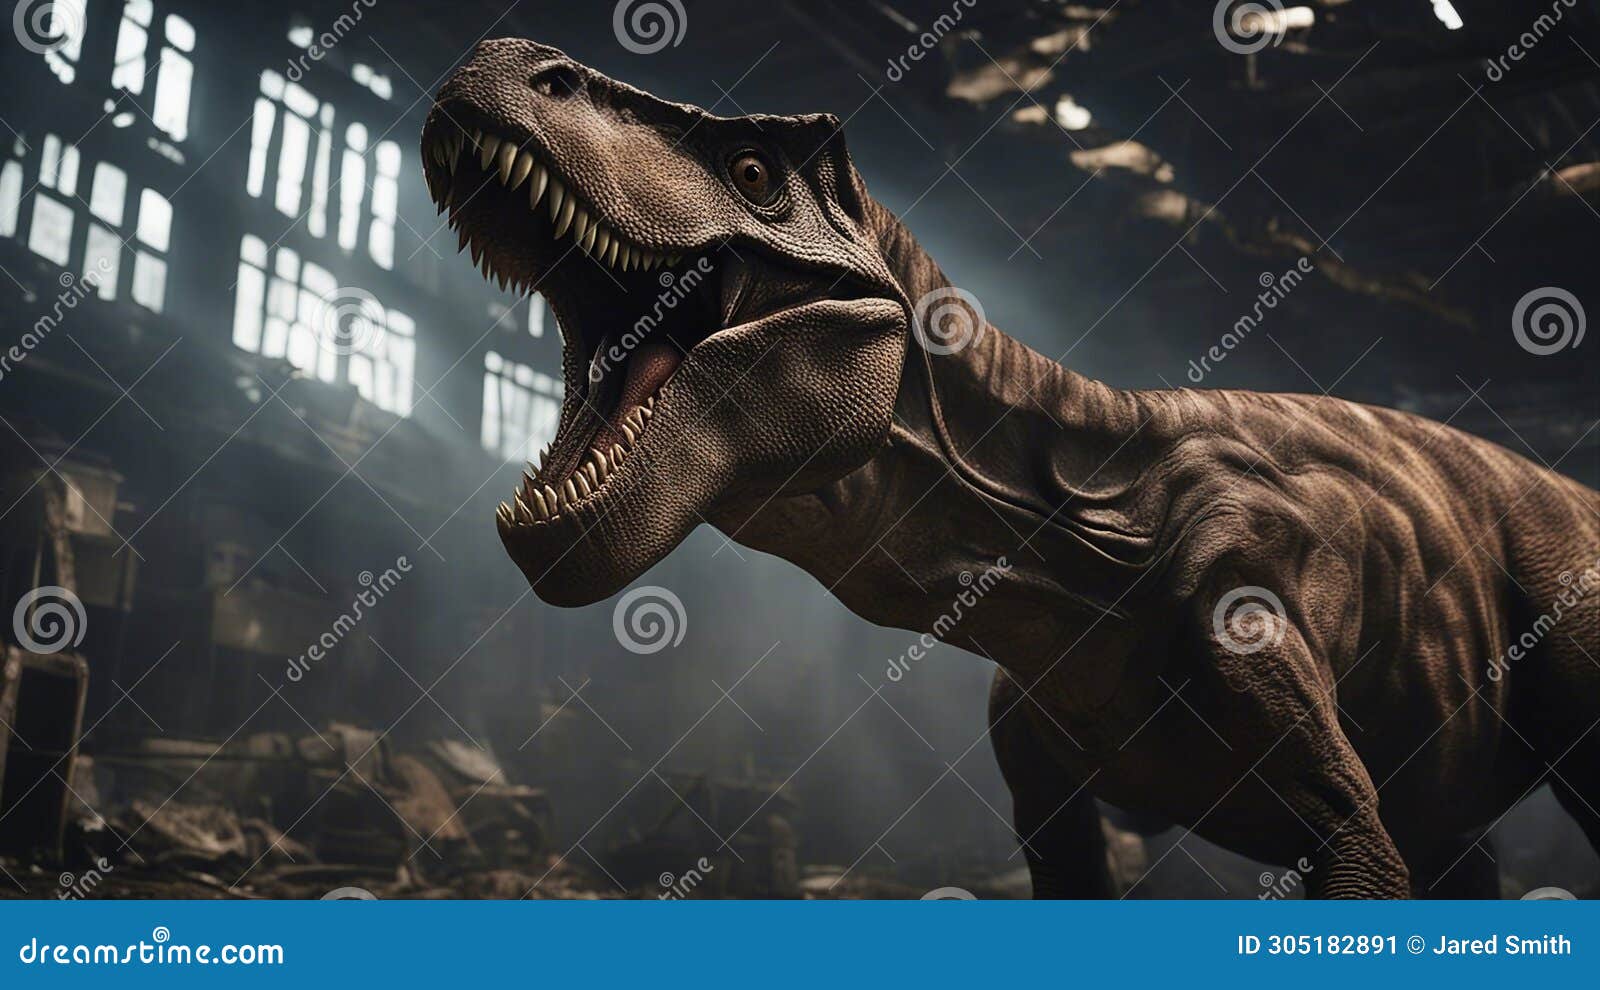 tyrannosaurus rex dinosaur the close up of the dinosaur was an exploited creature that existed in the dystopian world,